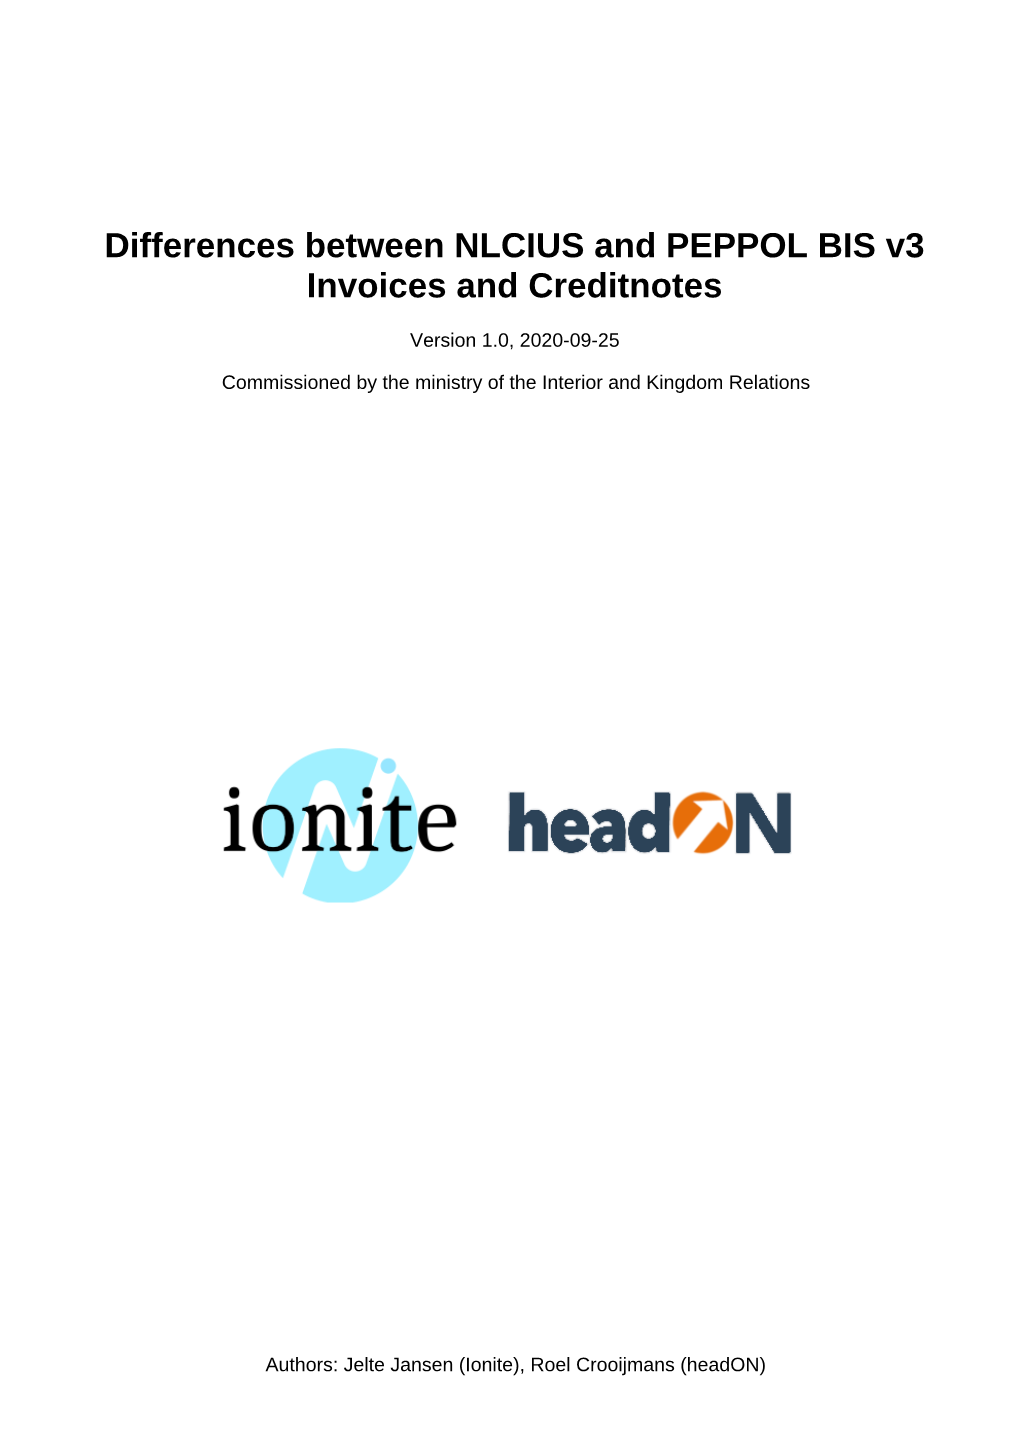 Differences Between NLCIUS and PEPPOL BIS V3 Invoices and Creditnotes